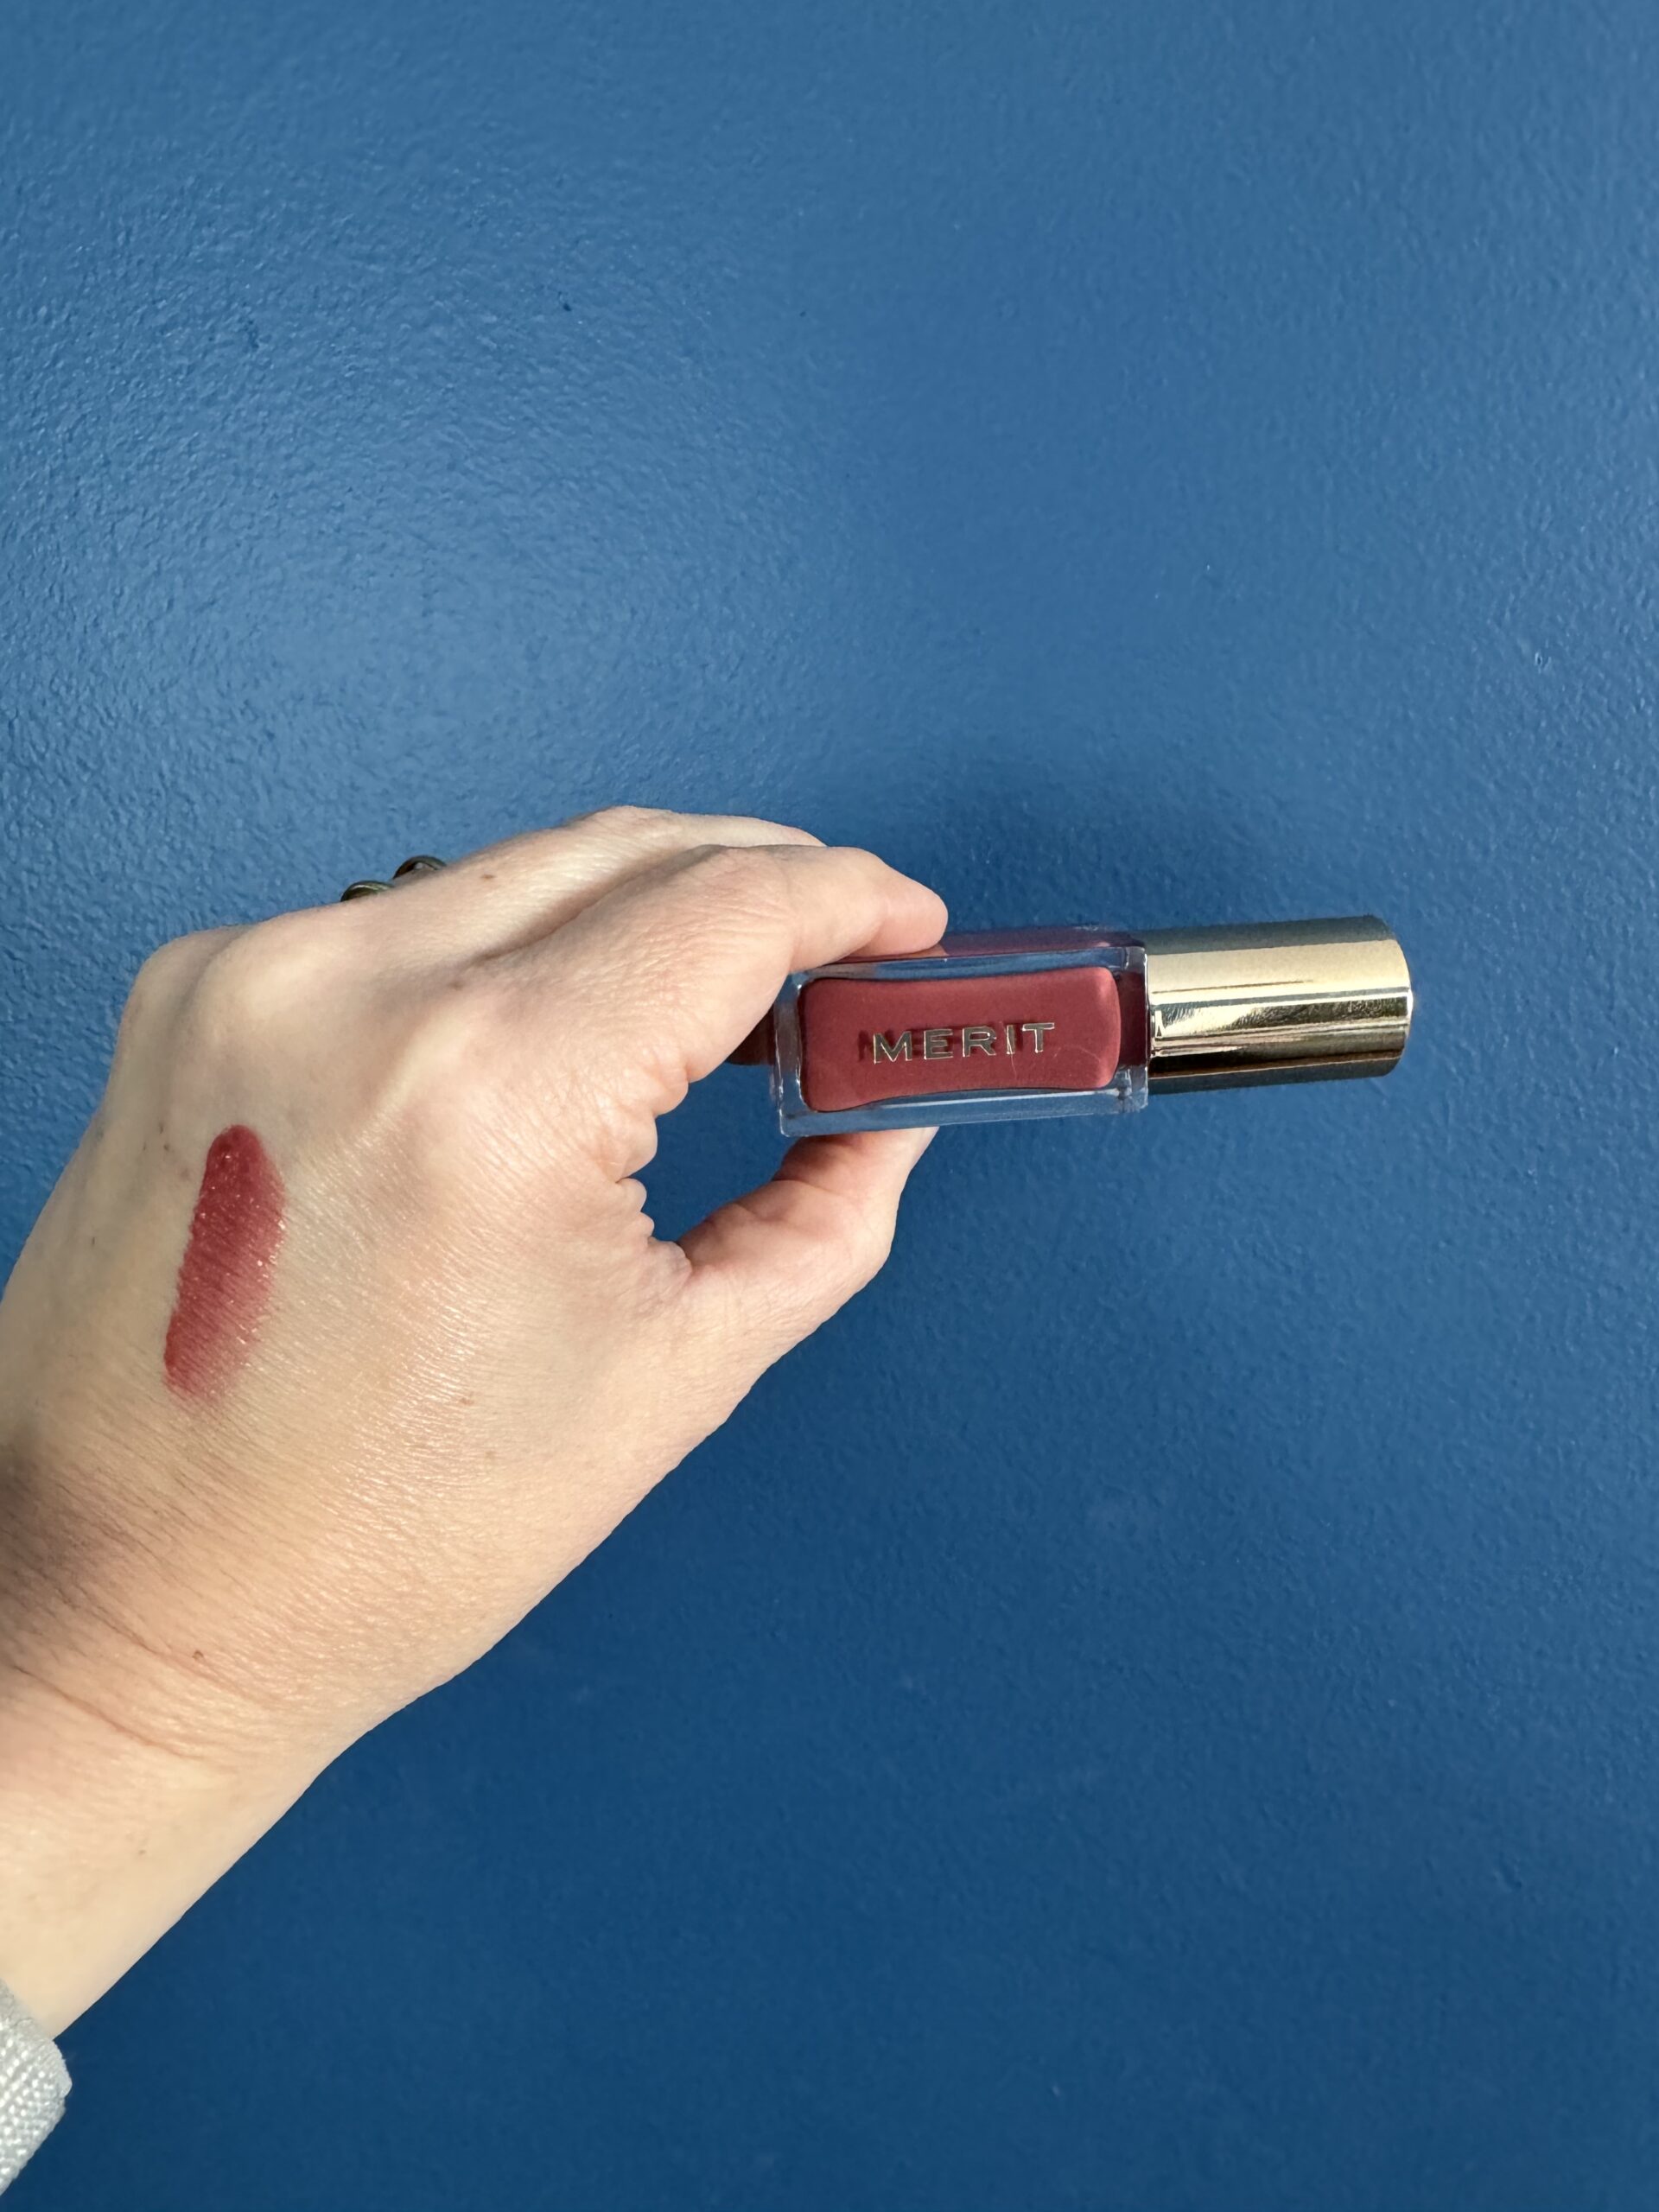 A hand holding a tube of merit lipstick against a blue background, with a swatch of the lipstick color on the person's wrist.